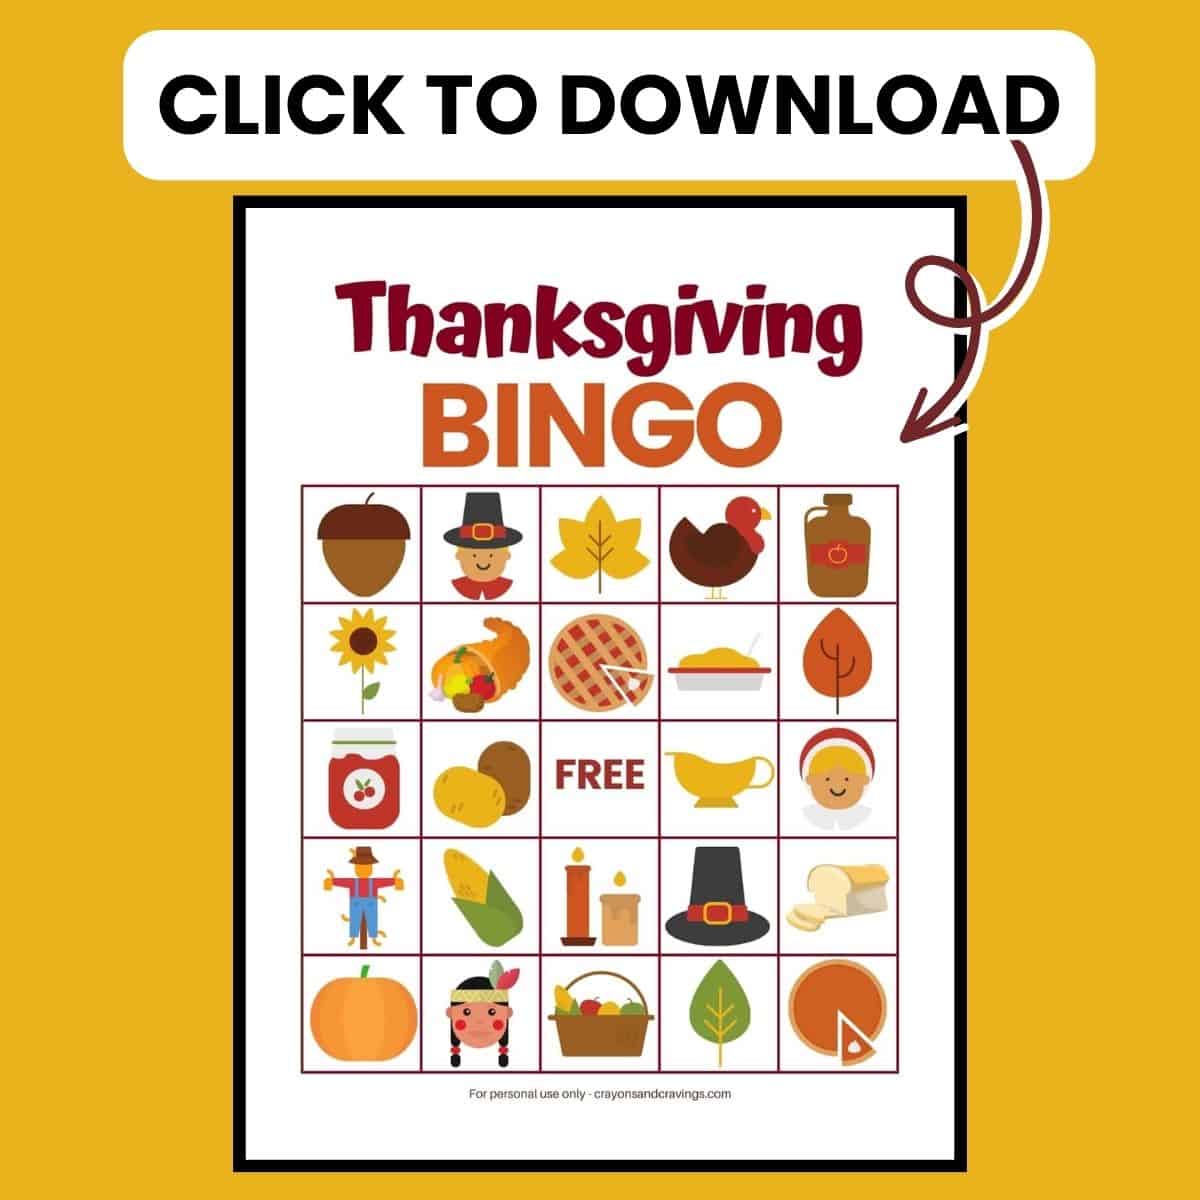 Click to sign up and download thanksgiving printable.